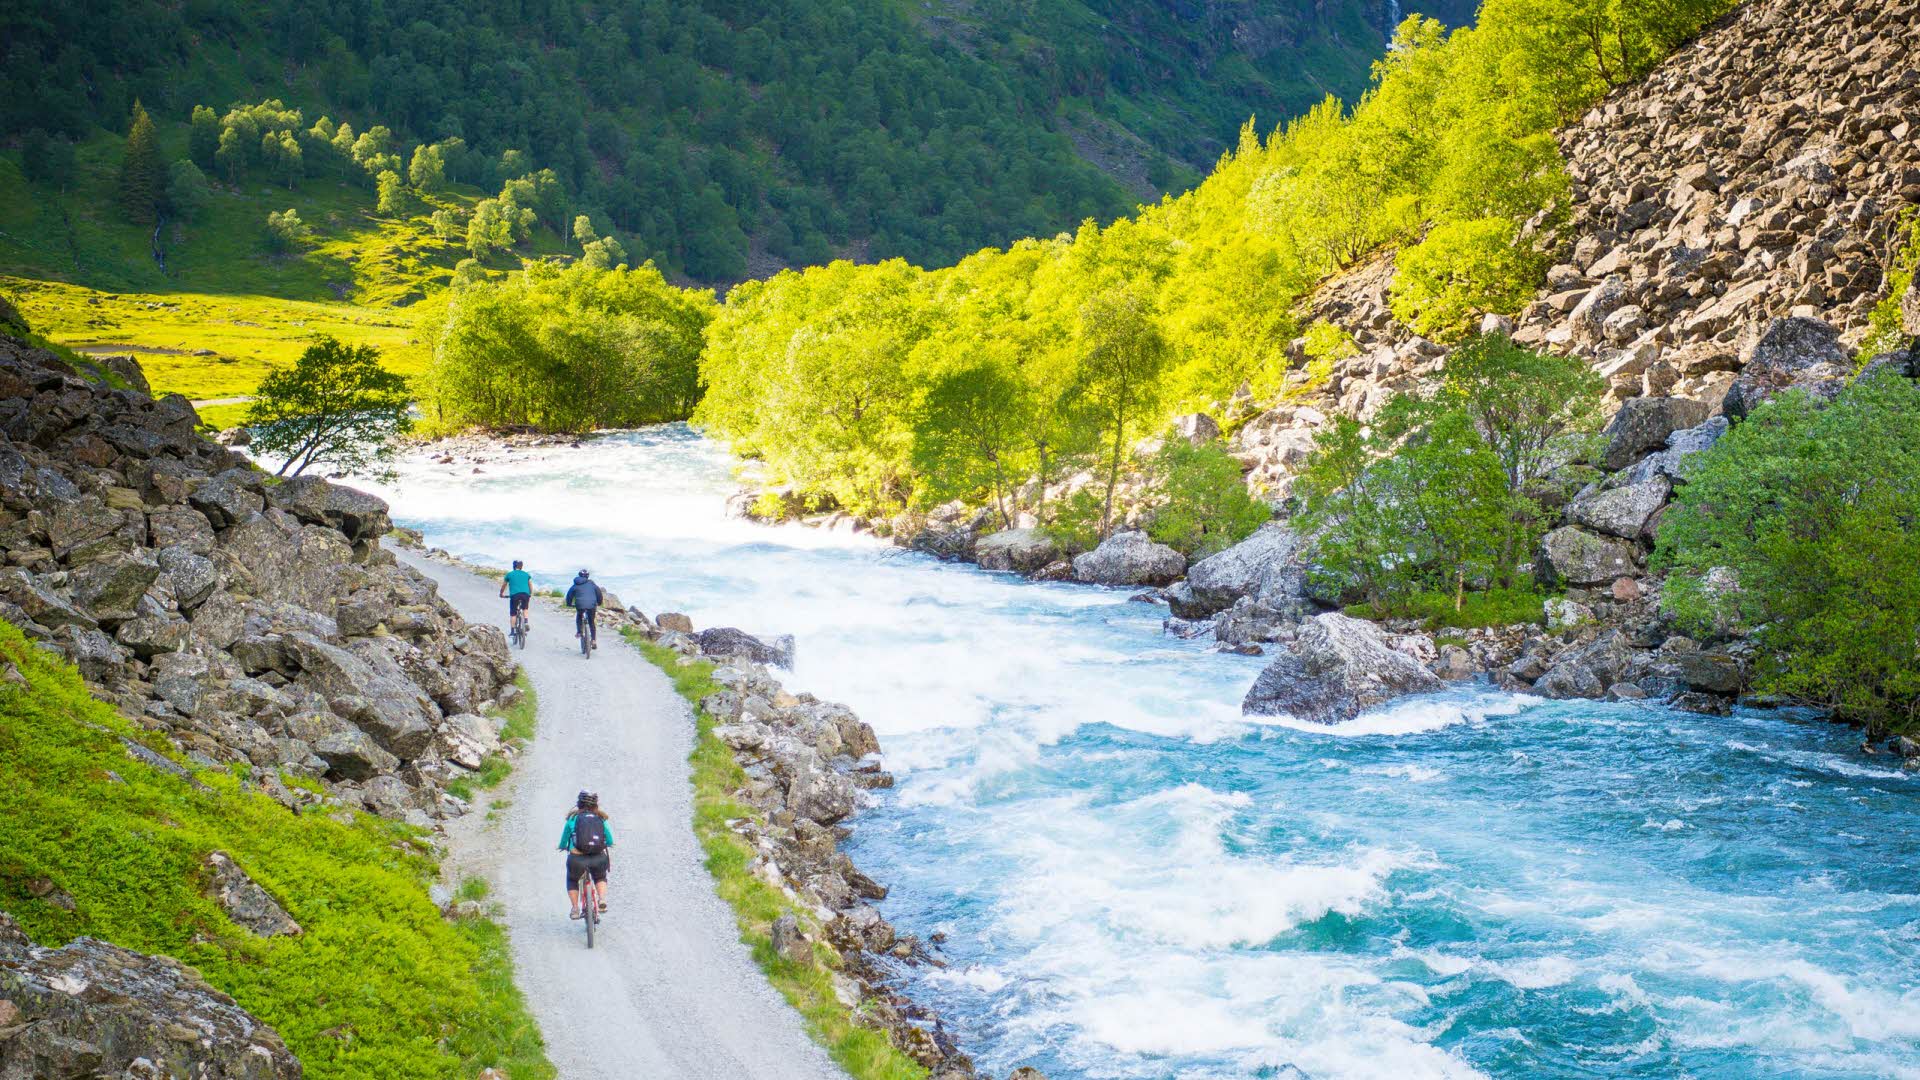 3 people bicycle down the Flam Valley gravel road by the green river and lush mountain sides in beautiful summer